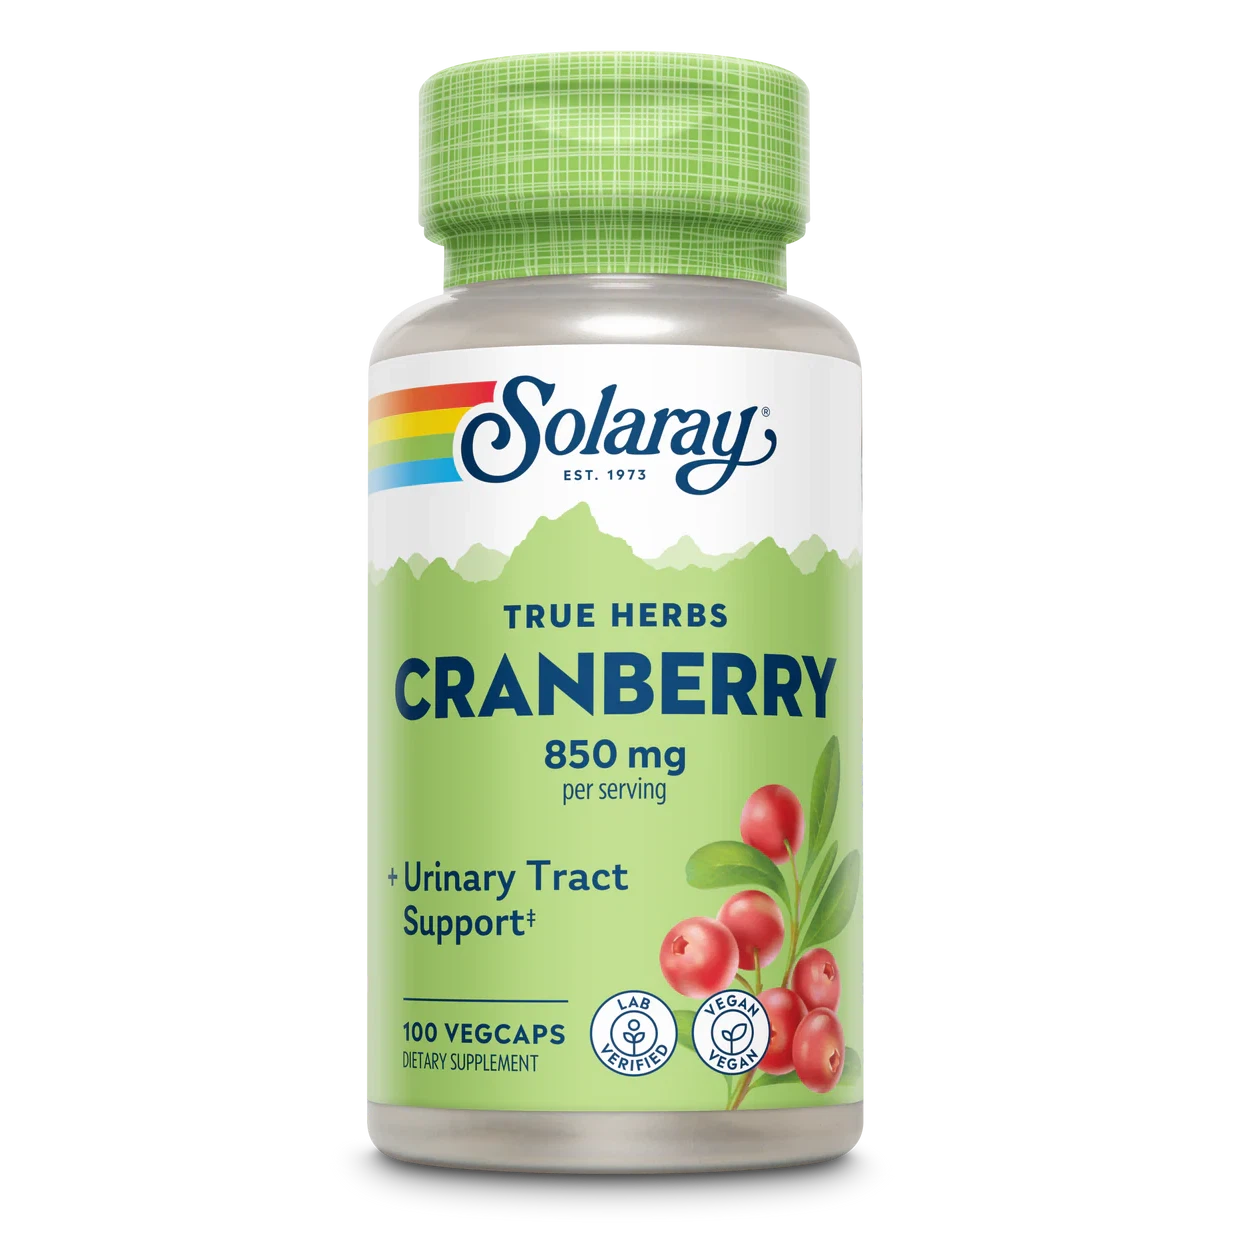 Solaray Cranberry Berry 850mg Urinary Tract Support 100 Vegetable Capsules